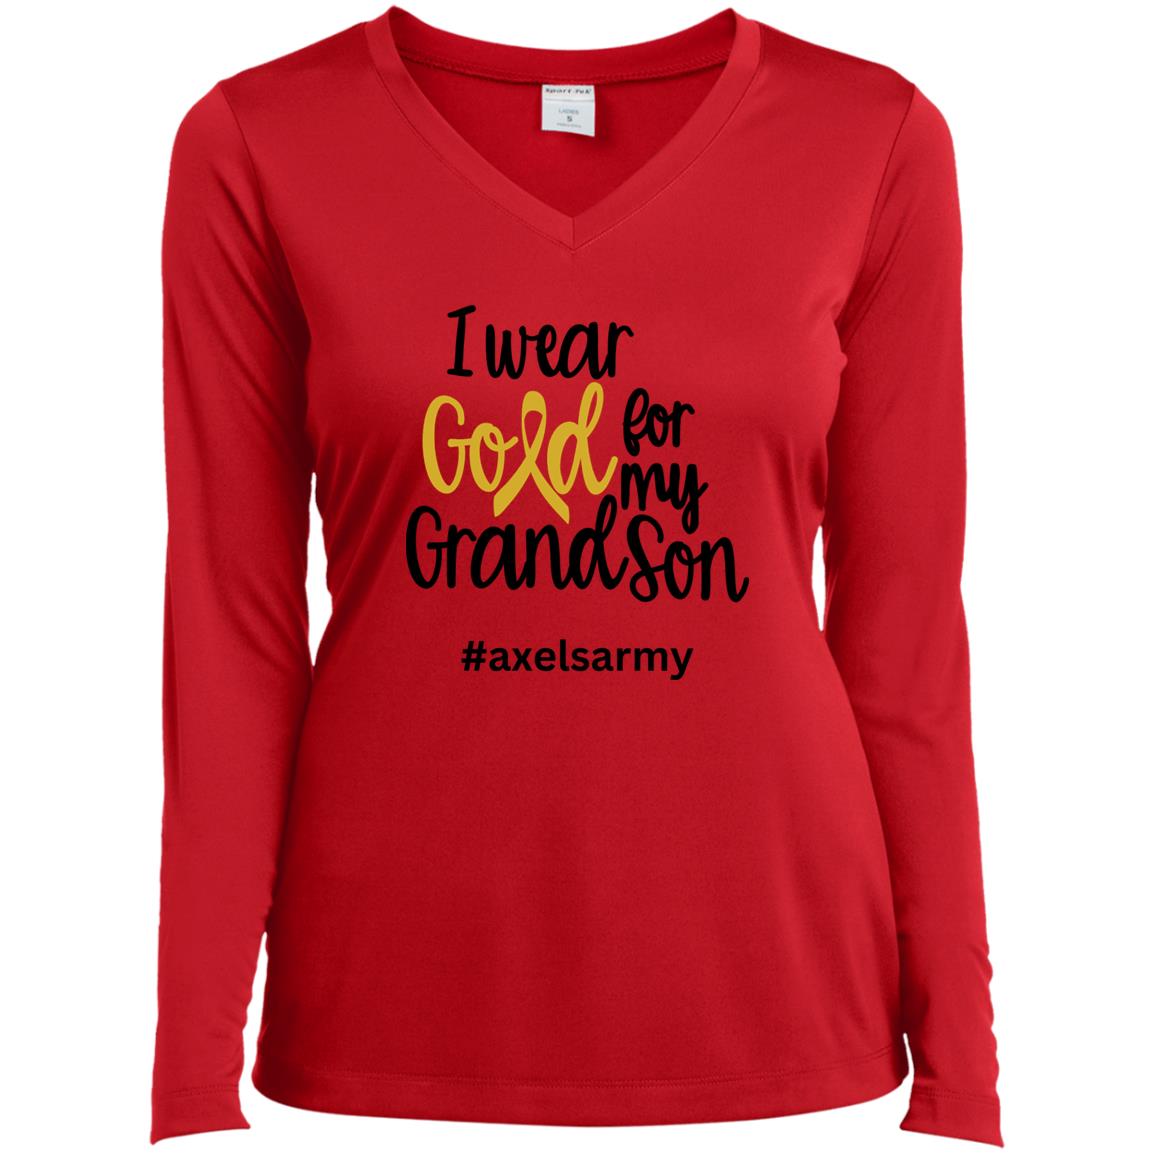 Axel’s Army Grandson Ladies’ Long Sleeve Performance V-Neck Tee